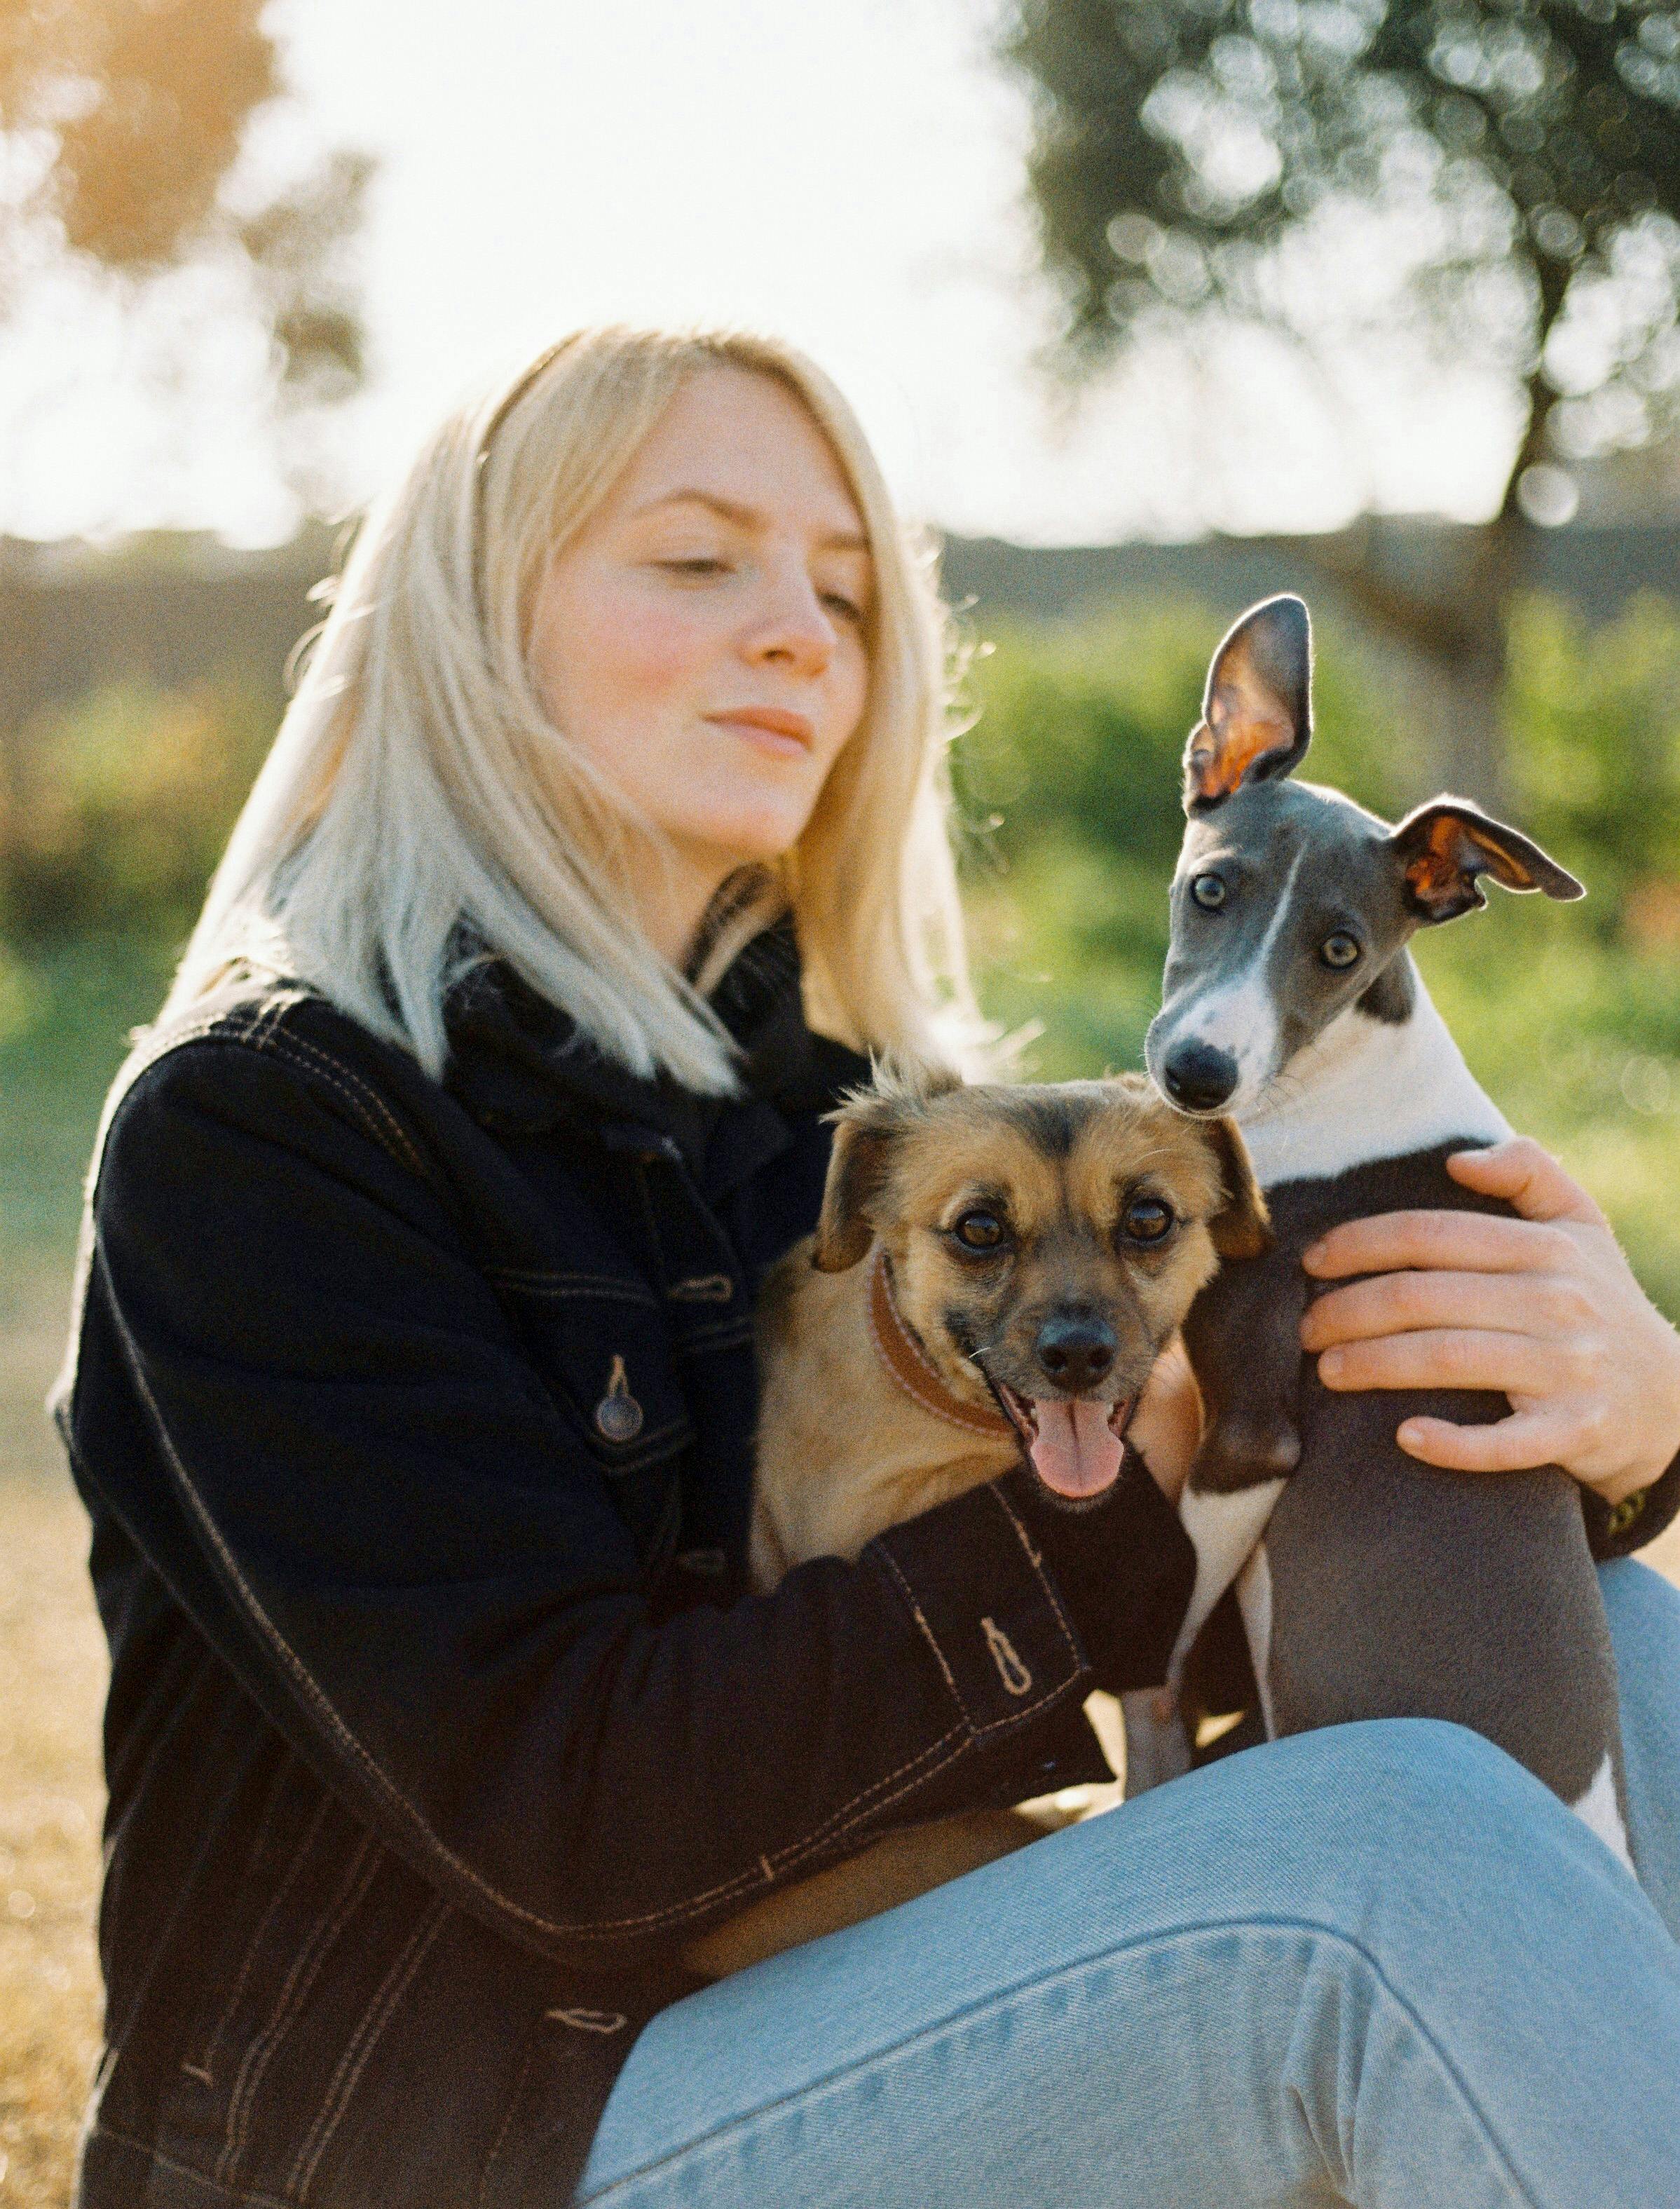 A woman with her dogs | Source: Pexels